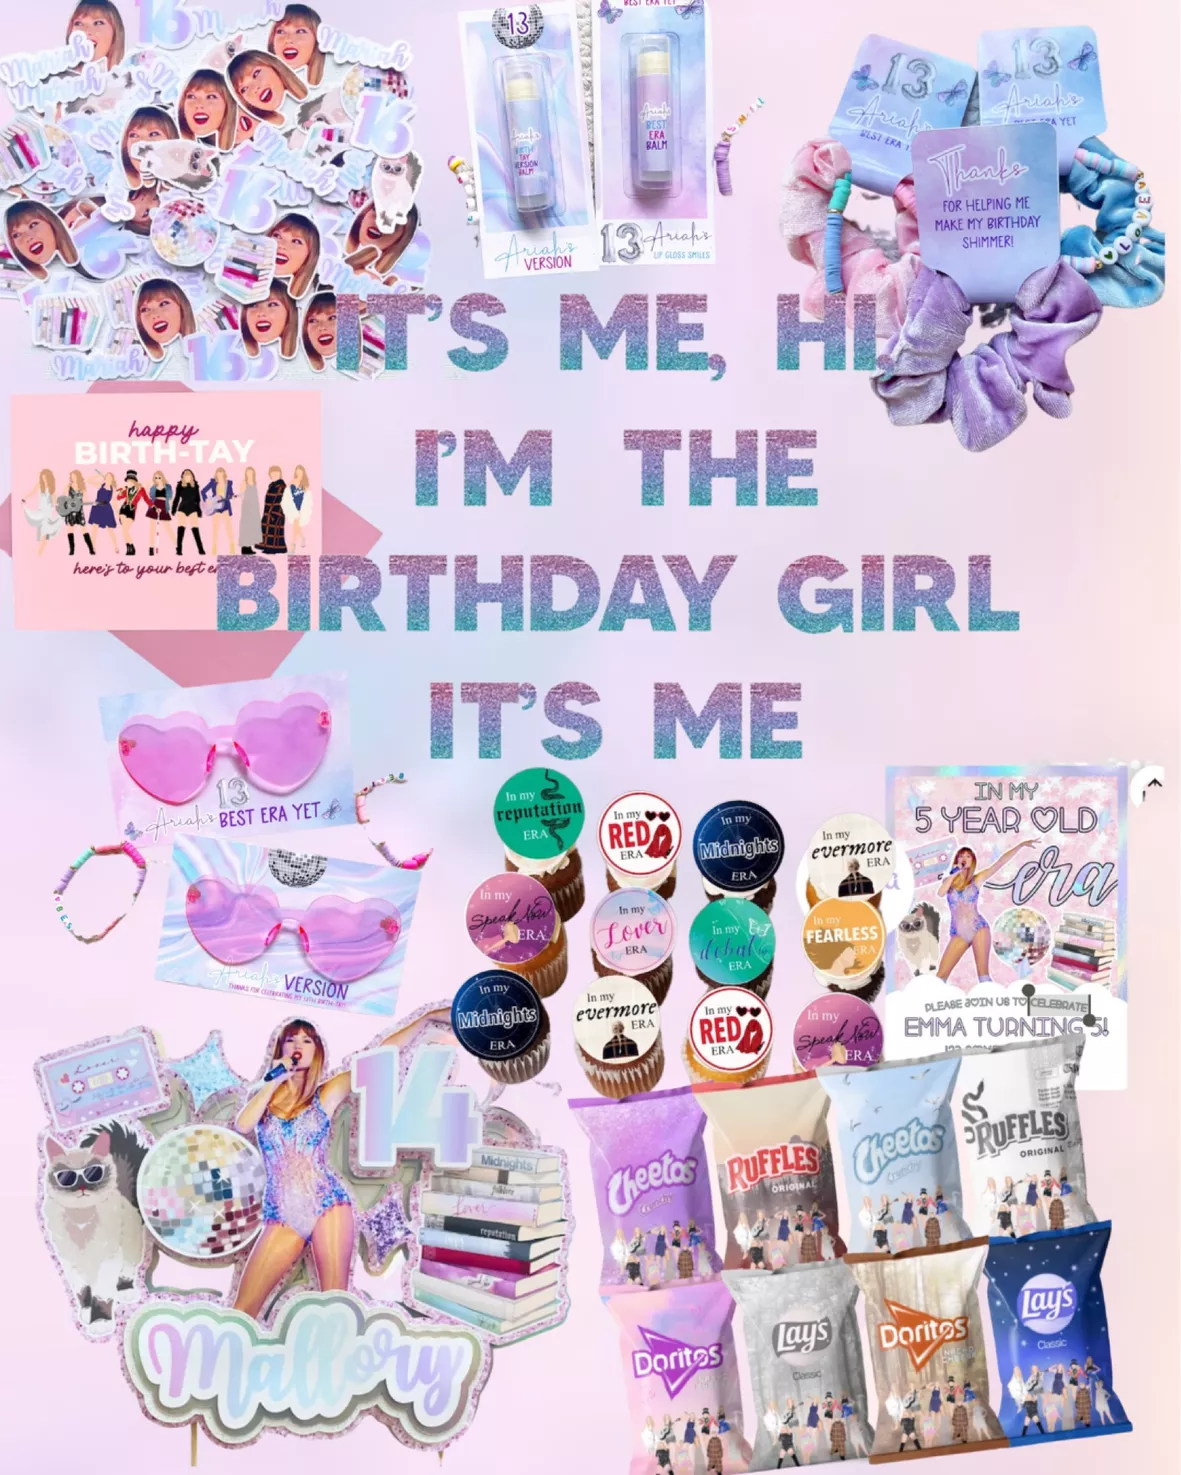 Taylor Swift Eras Tour Party Bags  Taylor swift birthday party ideas,  Taylor swift party, Taylor swift